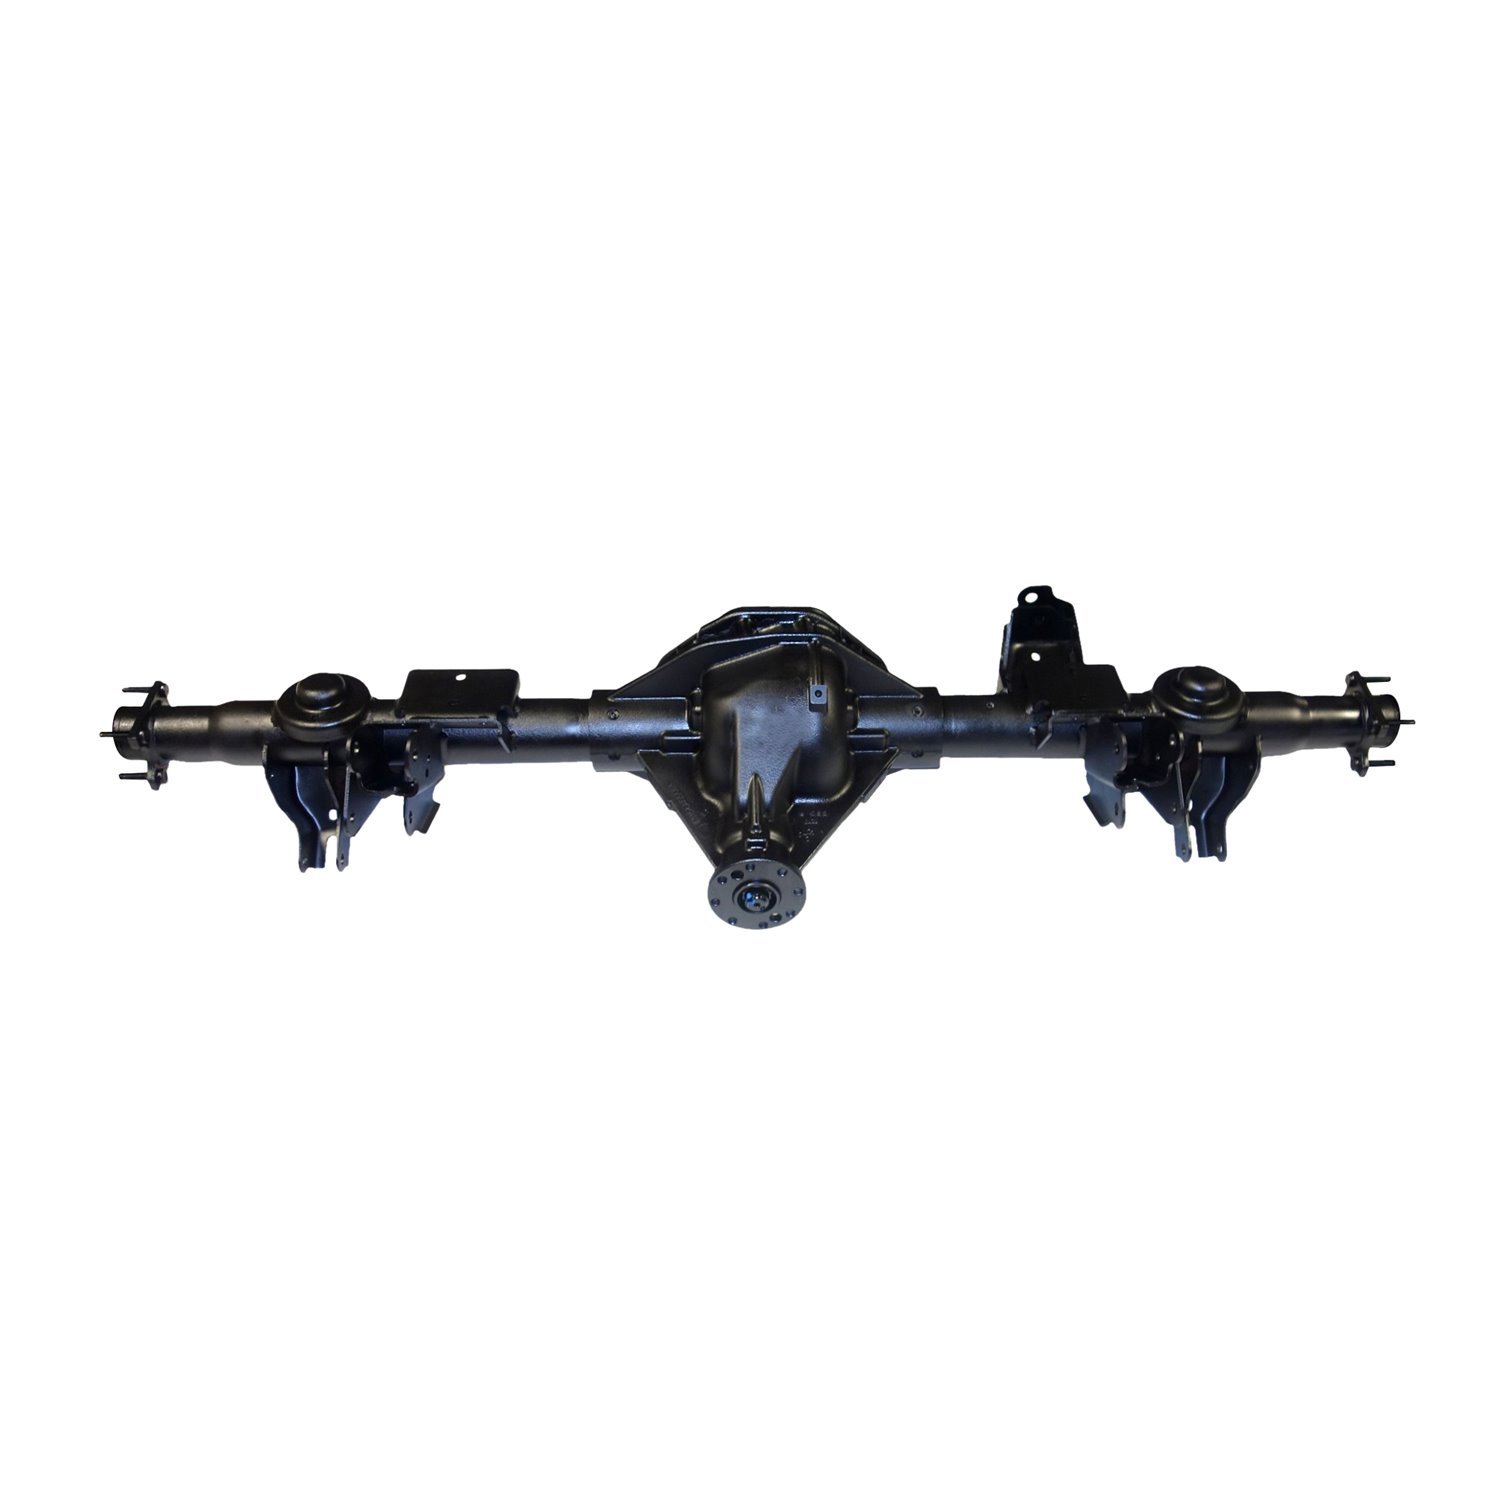 Remanufactured Complete Axle Assembly for Chrysler 9.25ZF 13-14 Dodge Ram 1500 3.55 Ratio